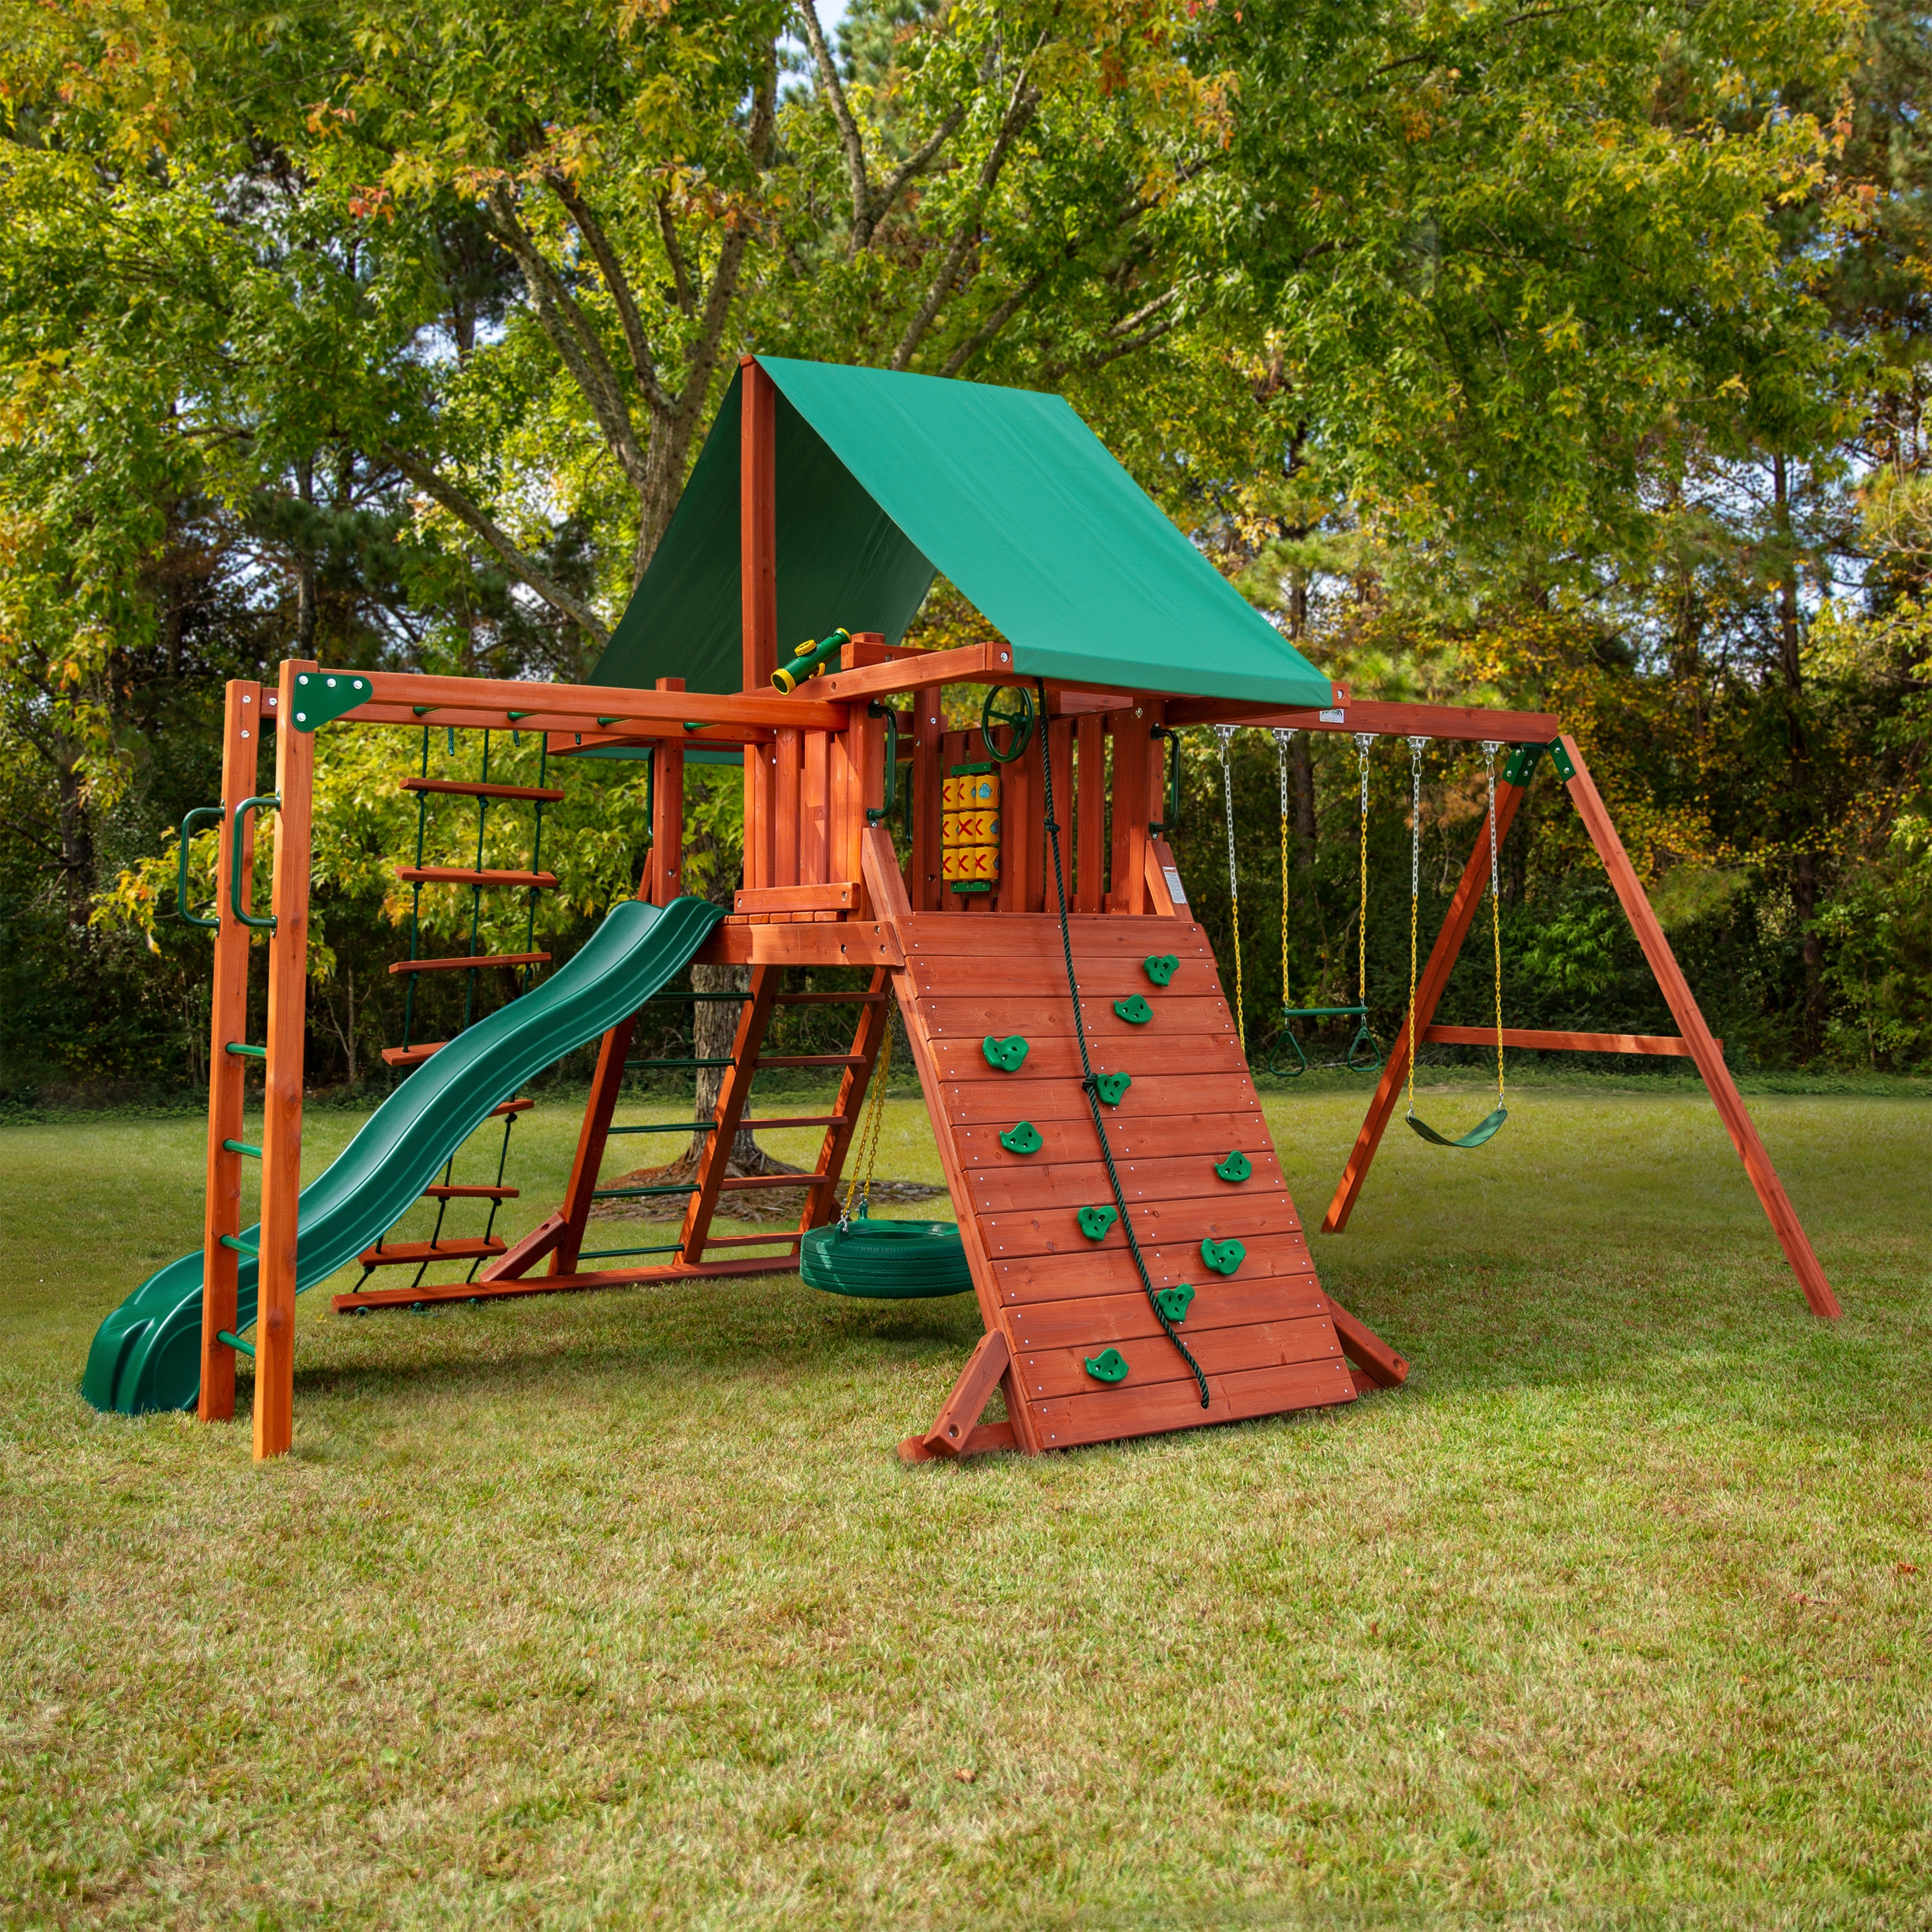 https://ak1.ostkcdn.com/images/products/is/images/direct/92109712166a8e28b6dfac2a794736e86aad9684/Gorilla-Playsets-Sun-Valley-II-Wood-Swing-Set-with-Monkey-Bars.jpg